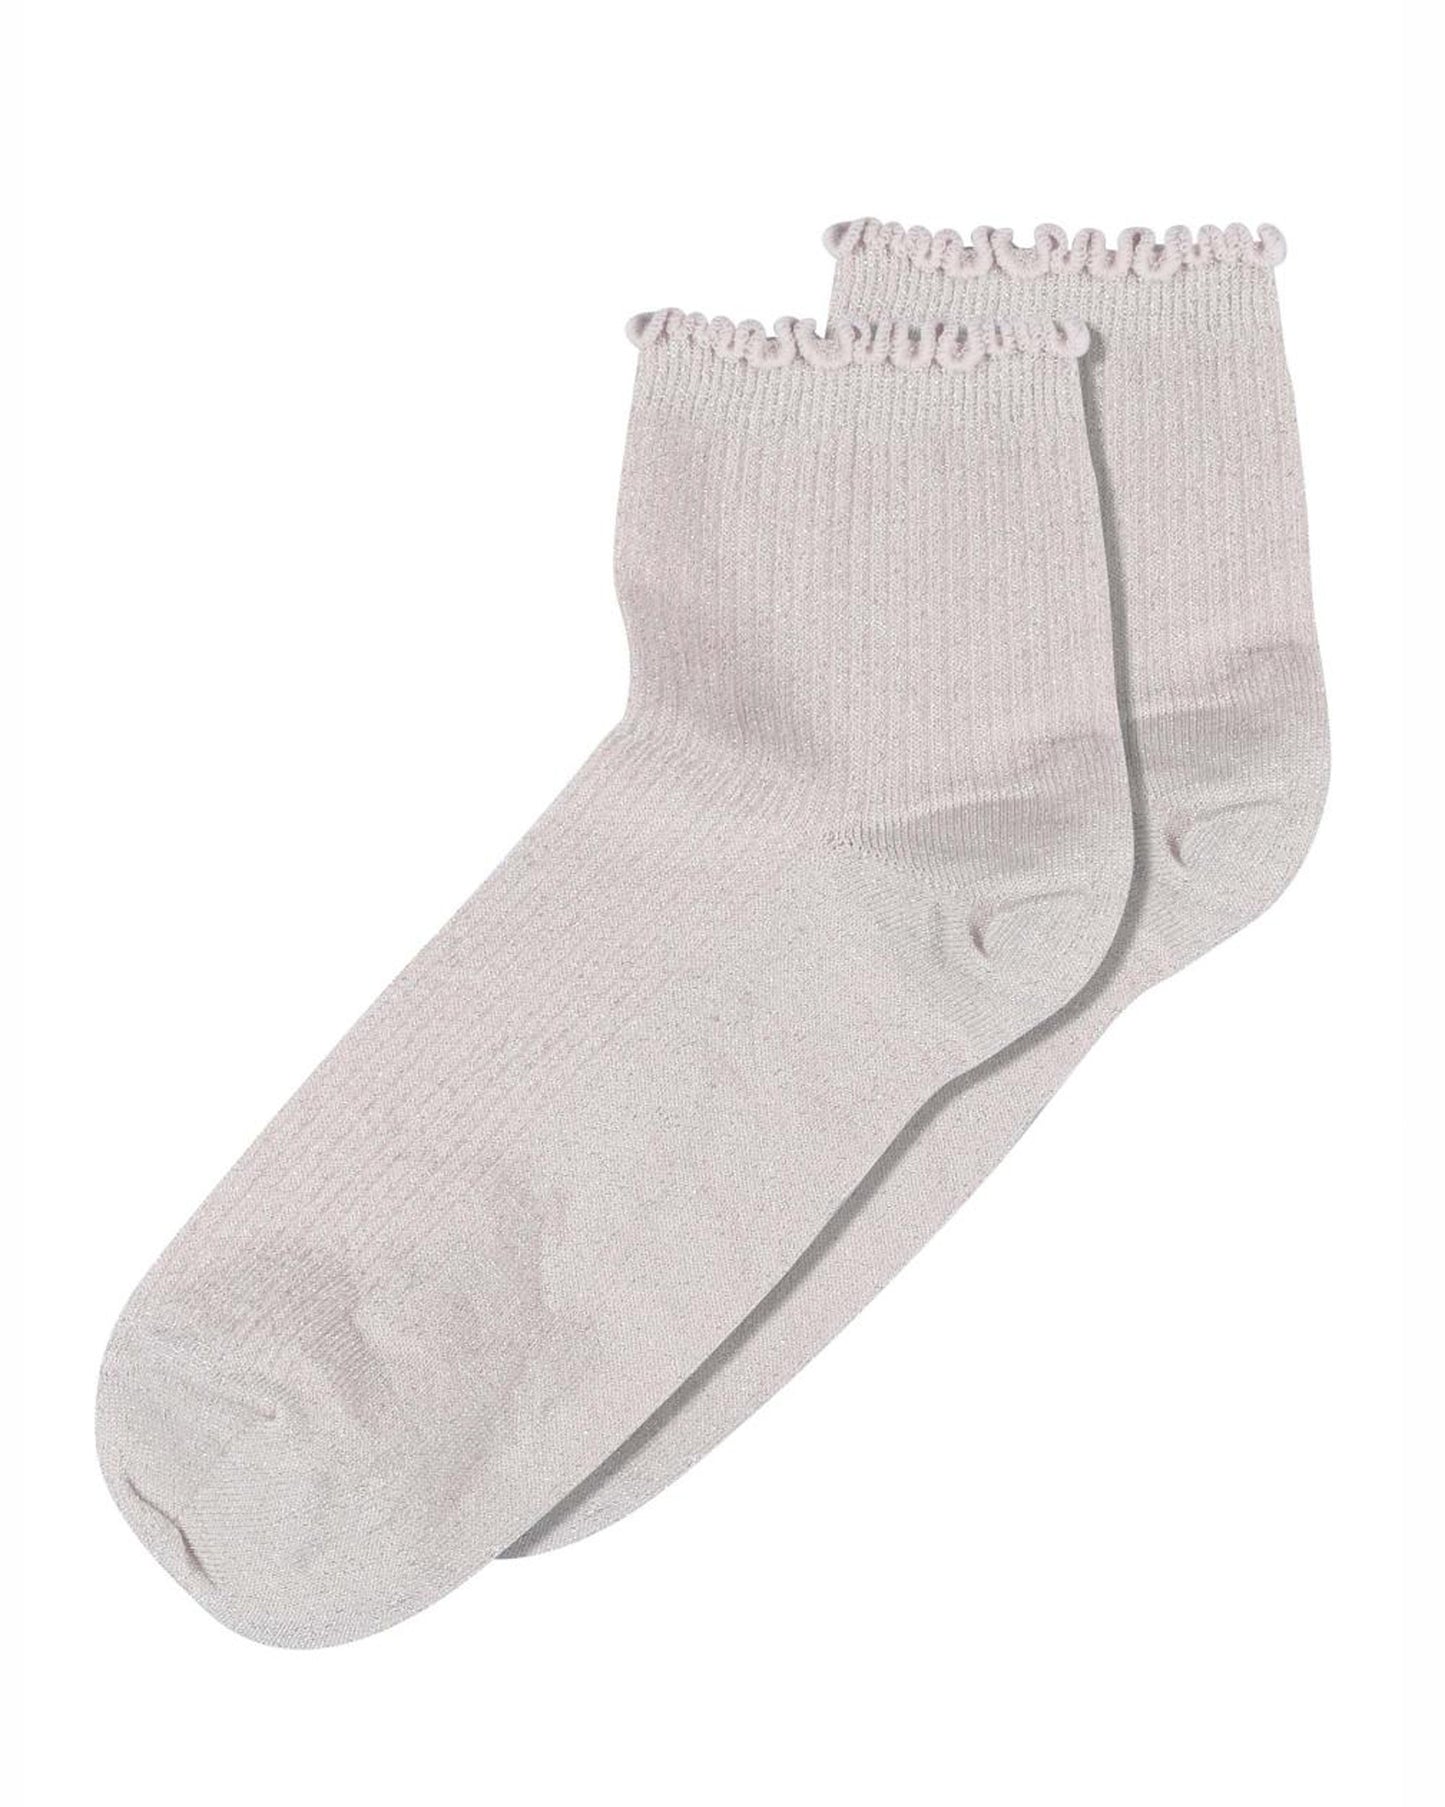 MP Denmark Lis Sock - Pale pink short quarter high ribbed lamé lurex cotton lined ankle socks with with frilly edge, plain sole, shaped heel and flat toe seam.